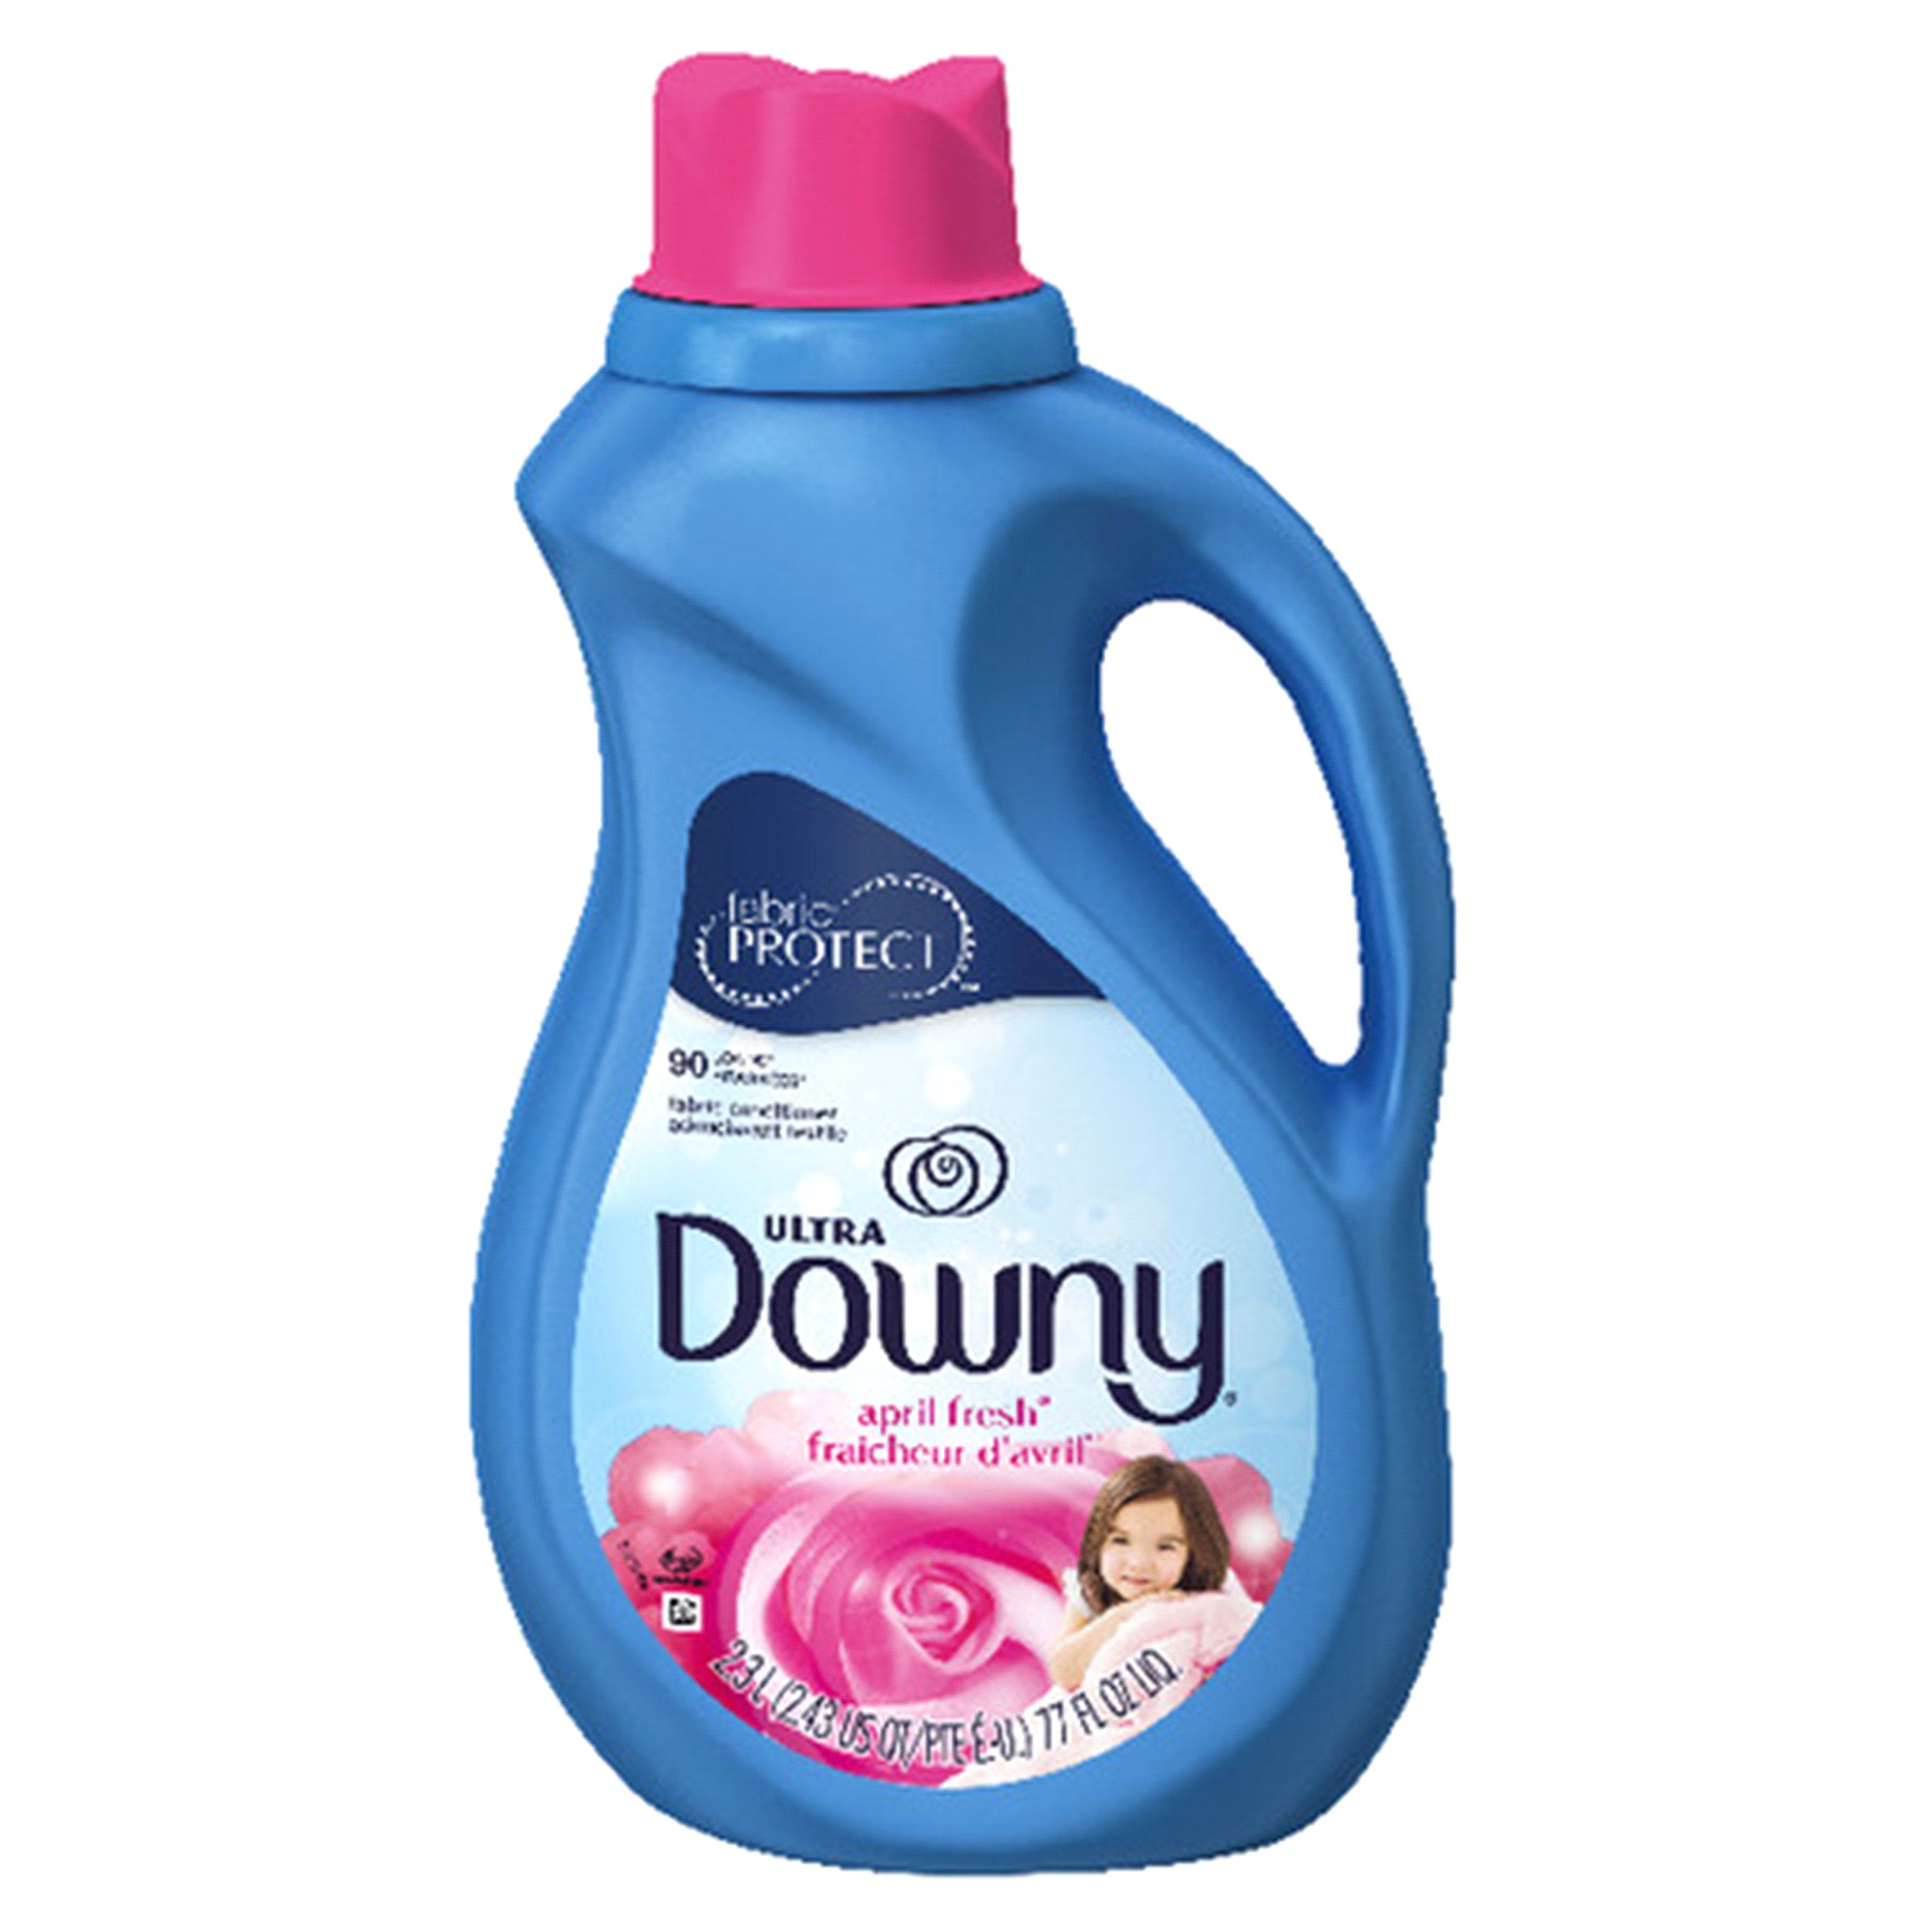 Liquid Downy Fabric softener Dog Urine Downy Ultra Concentrated April Fresh Scent 90 Loads Fabric softener